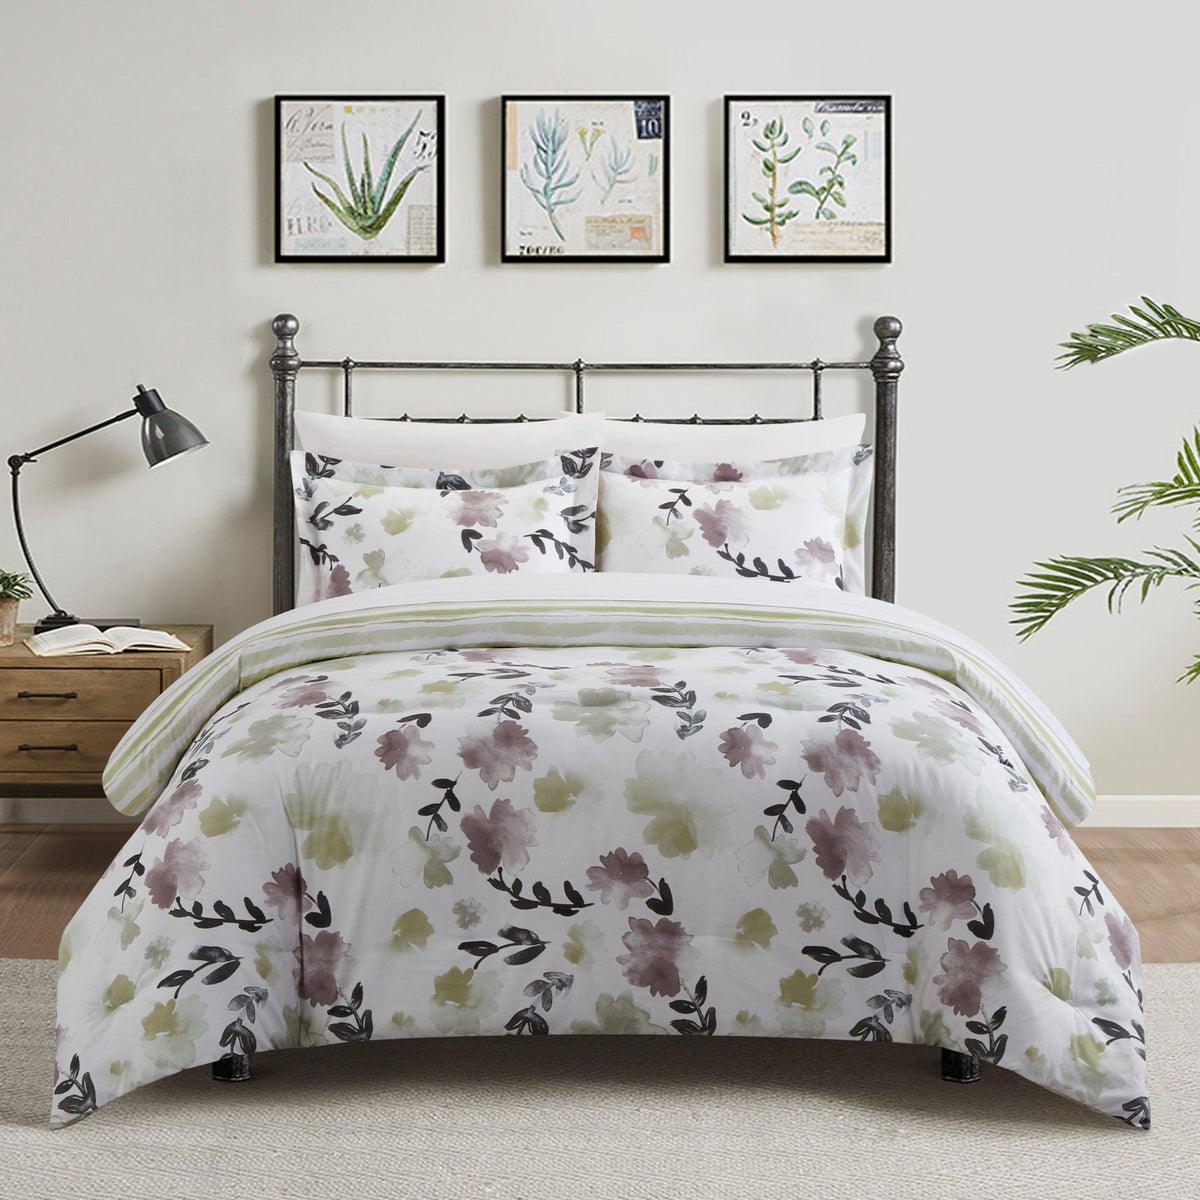 Chic Home Everly Green 3 Piece Reversible Watercolor Floral Print Duvet Cover Set Green